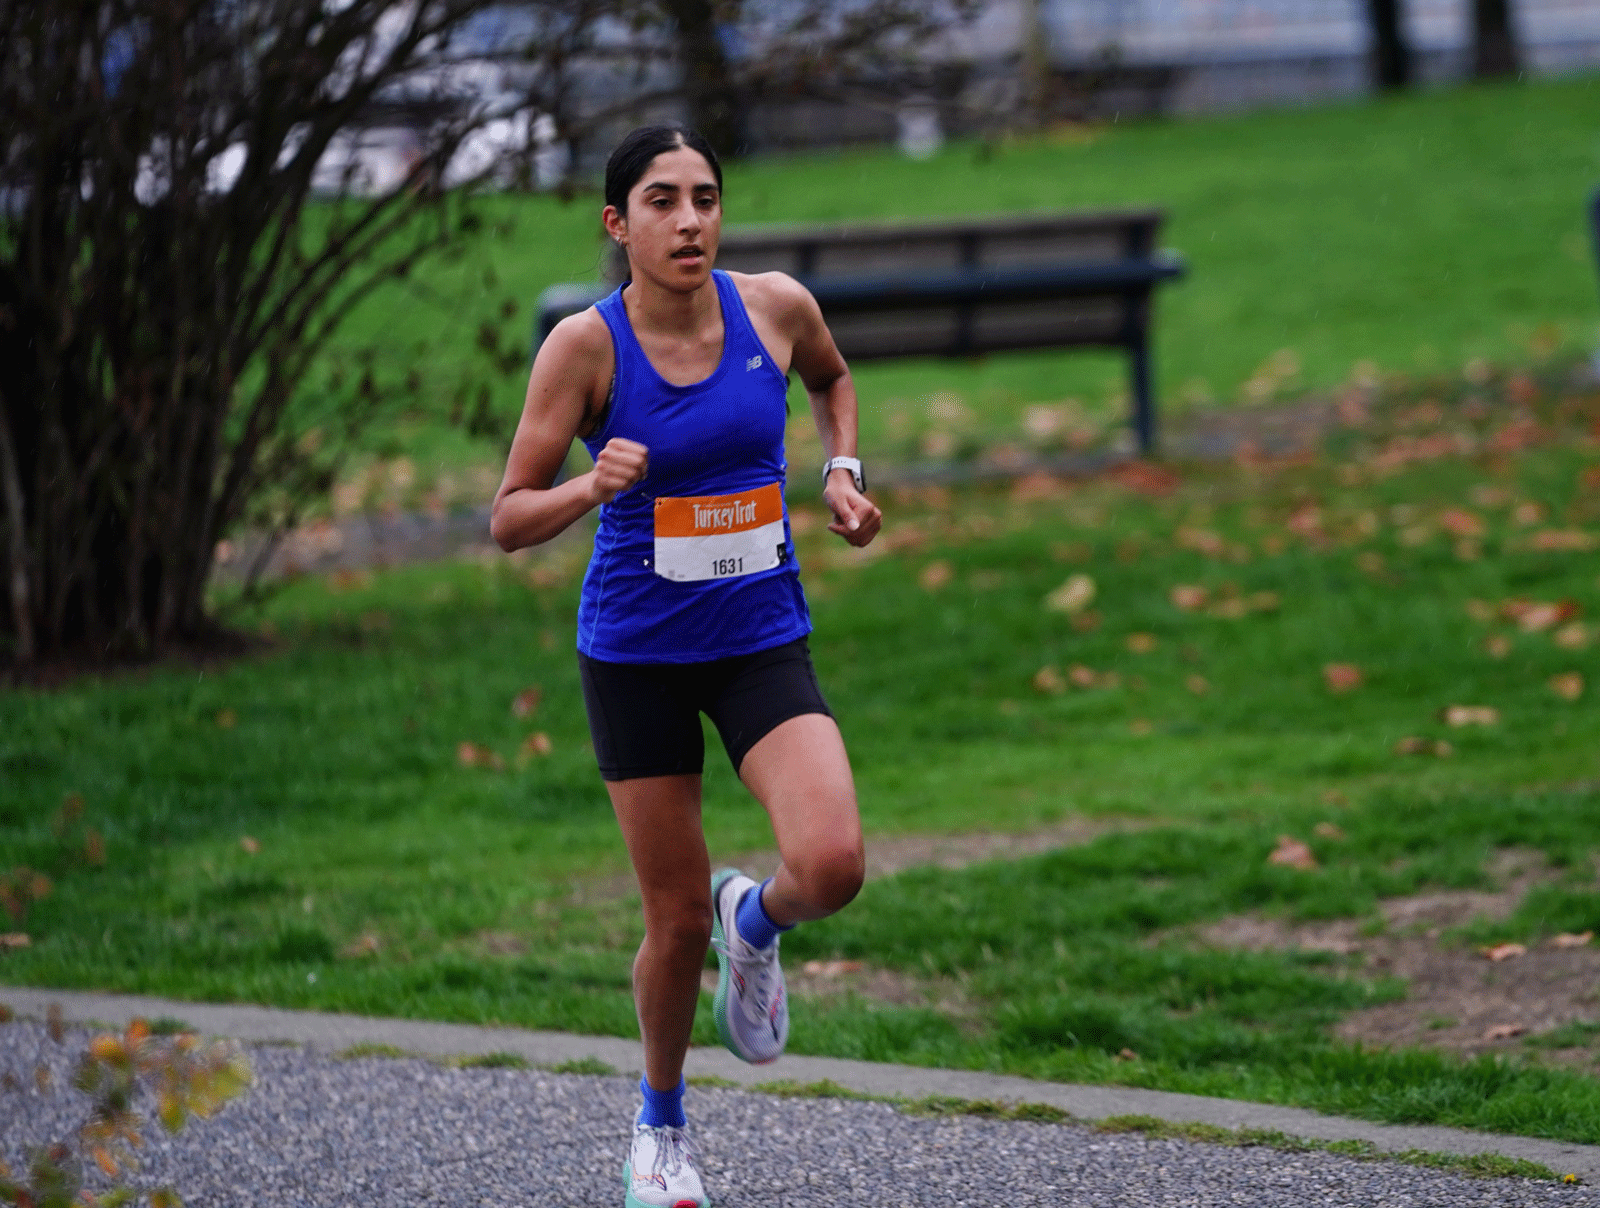 Ria Gill competing during the Vancouver Turkey Trot where she achieved a time of 37:38, placing her 5th all-time for the event.